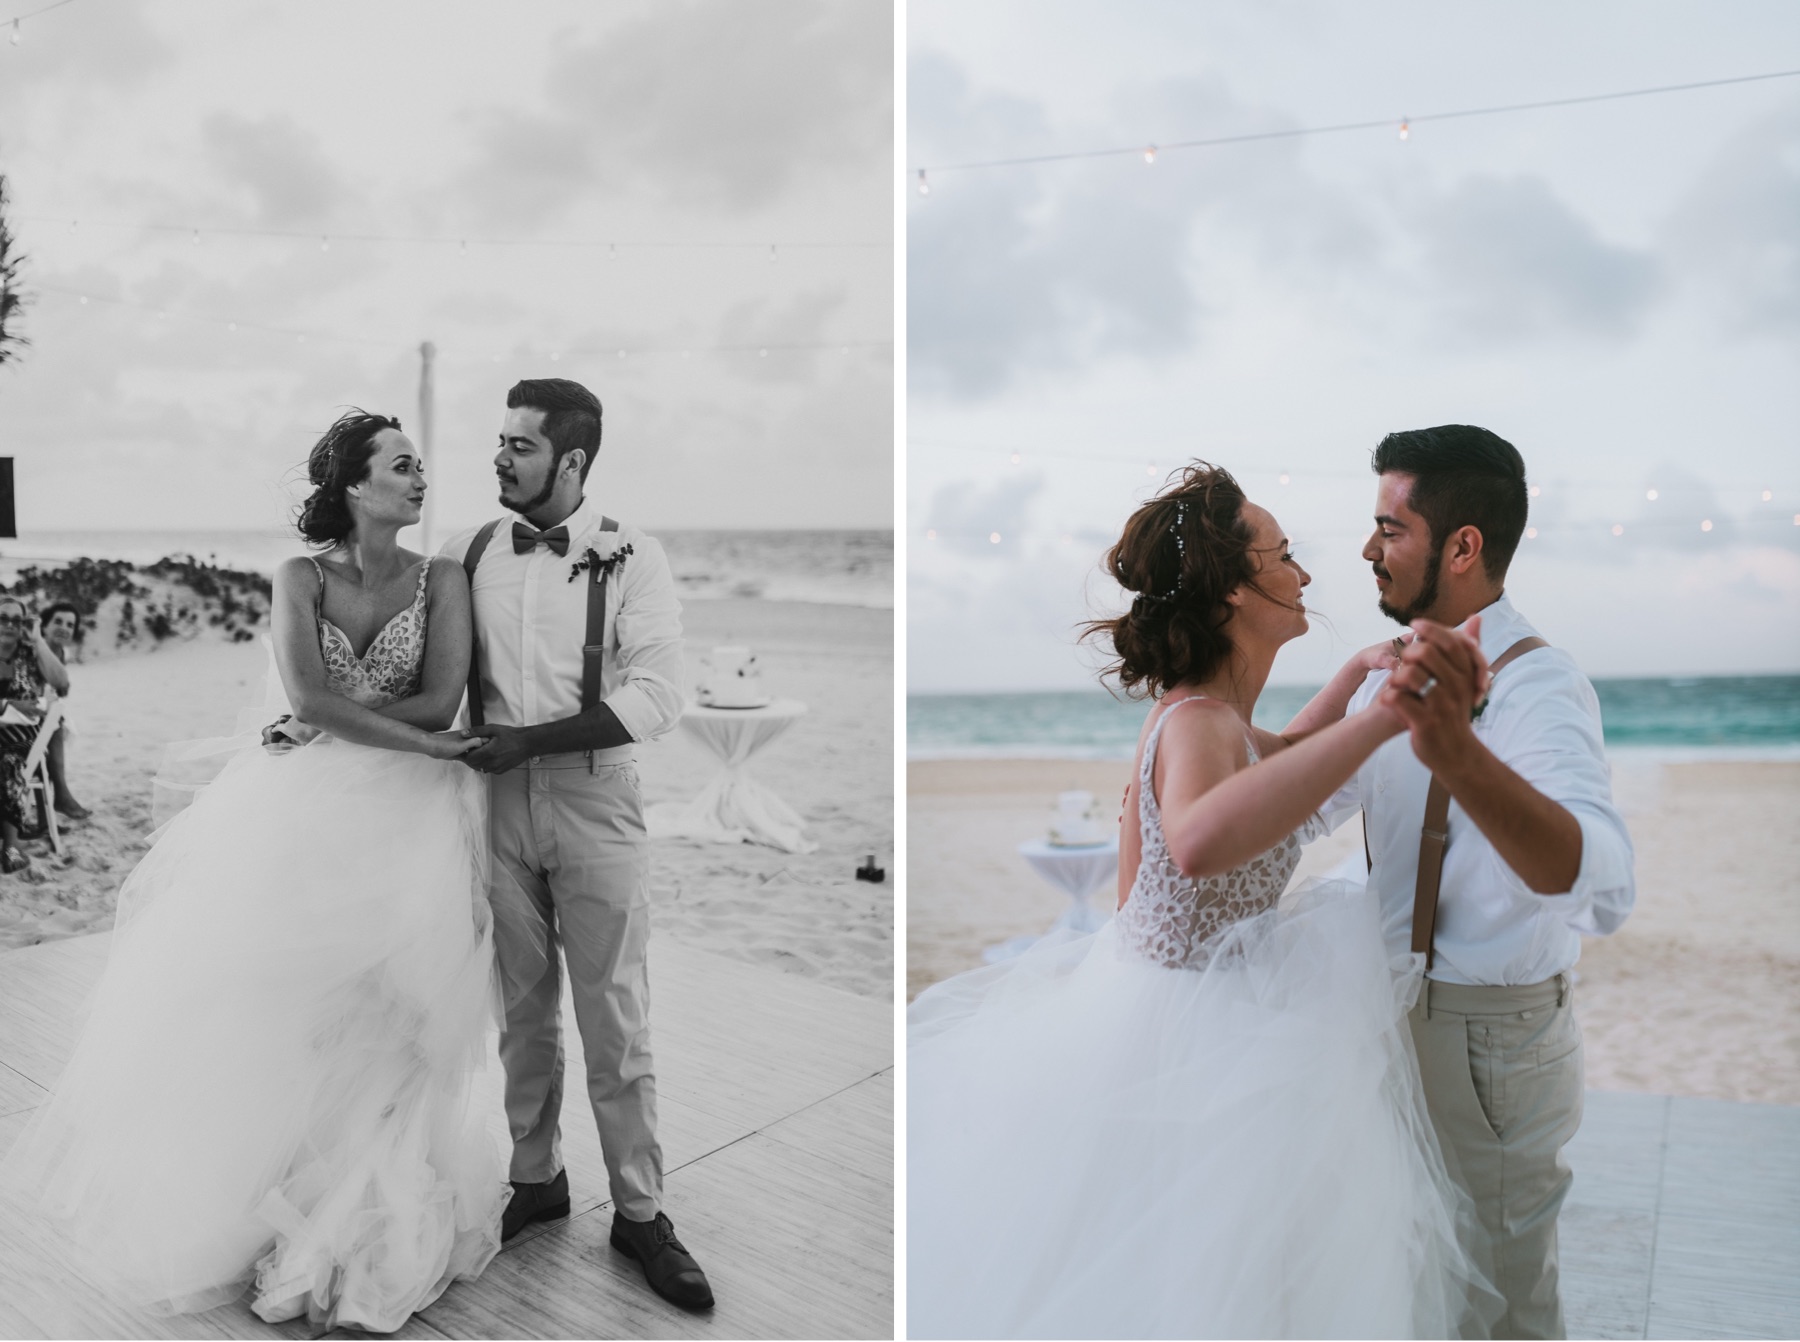 Side by side photos if bride and groom during their first dance at their beach wedding at hard rock punta cana